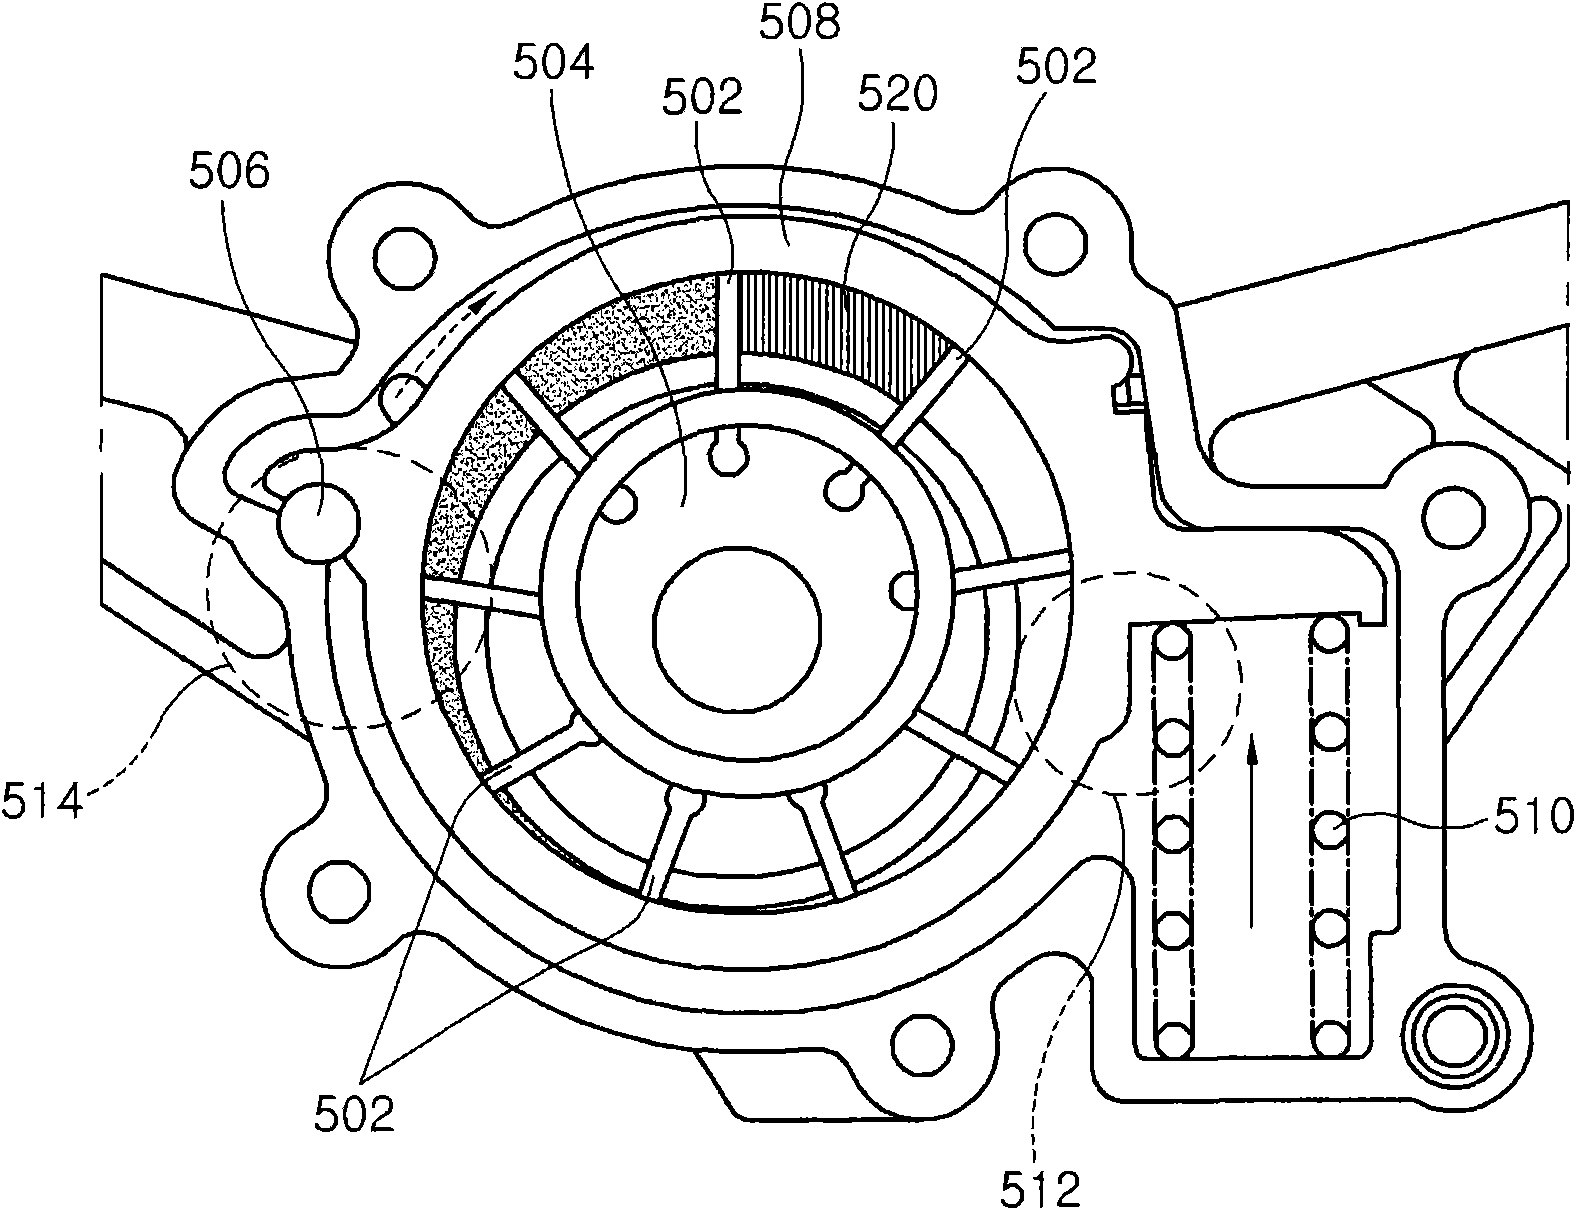 Structure of variable oil pump